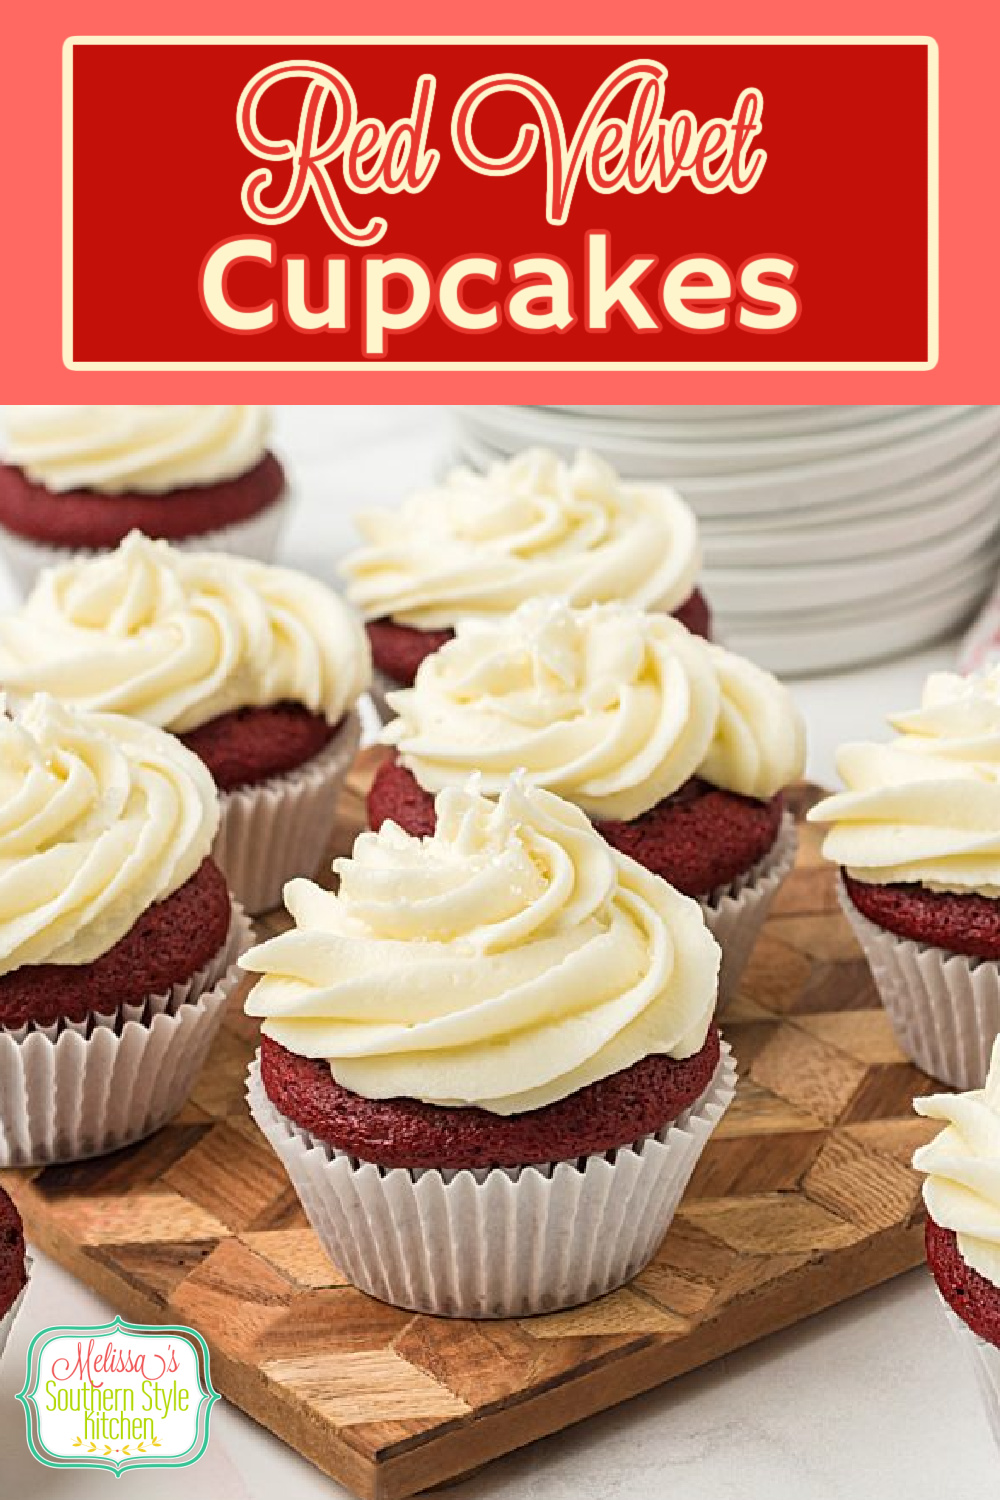 These scratch made Red Velvet Cupcakes are a supreme choice for birthday celebrations, casual family gatherings and holiday parties #redvelvet #cupcakes #redvelvetcupcakes #cupcakerecipes #southernredvelvet #chocolatecake #chocolatecupcakes